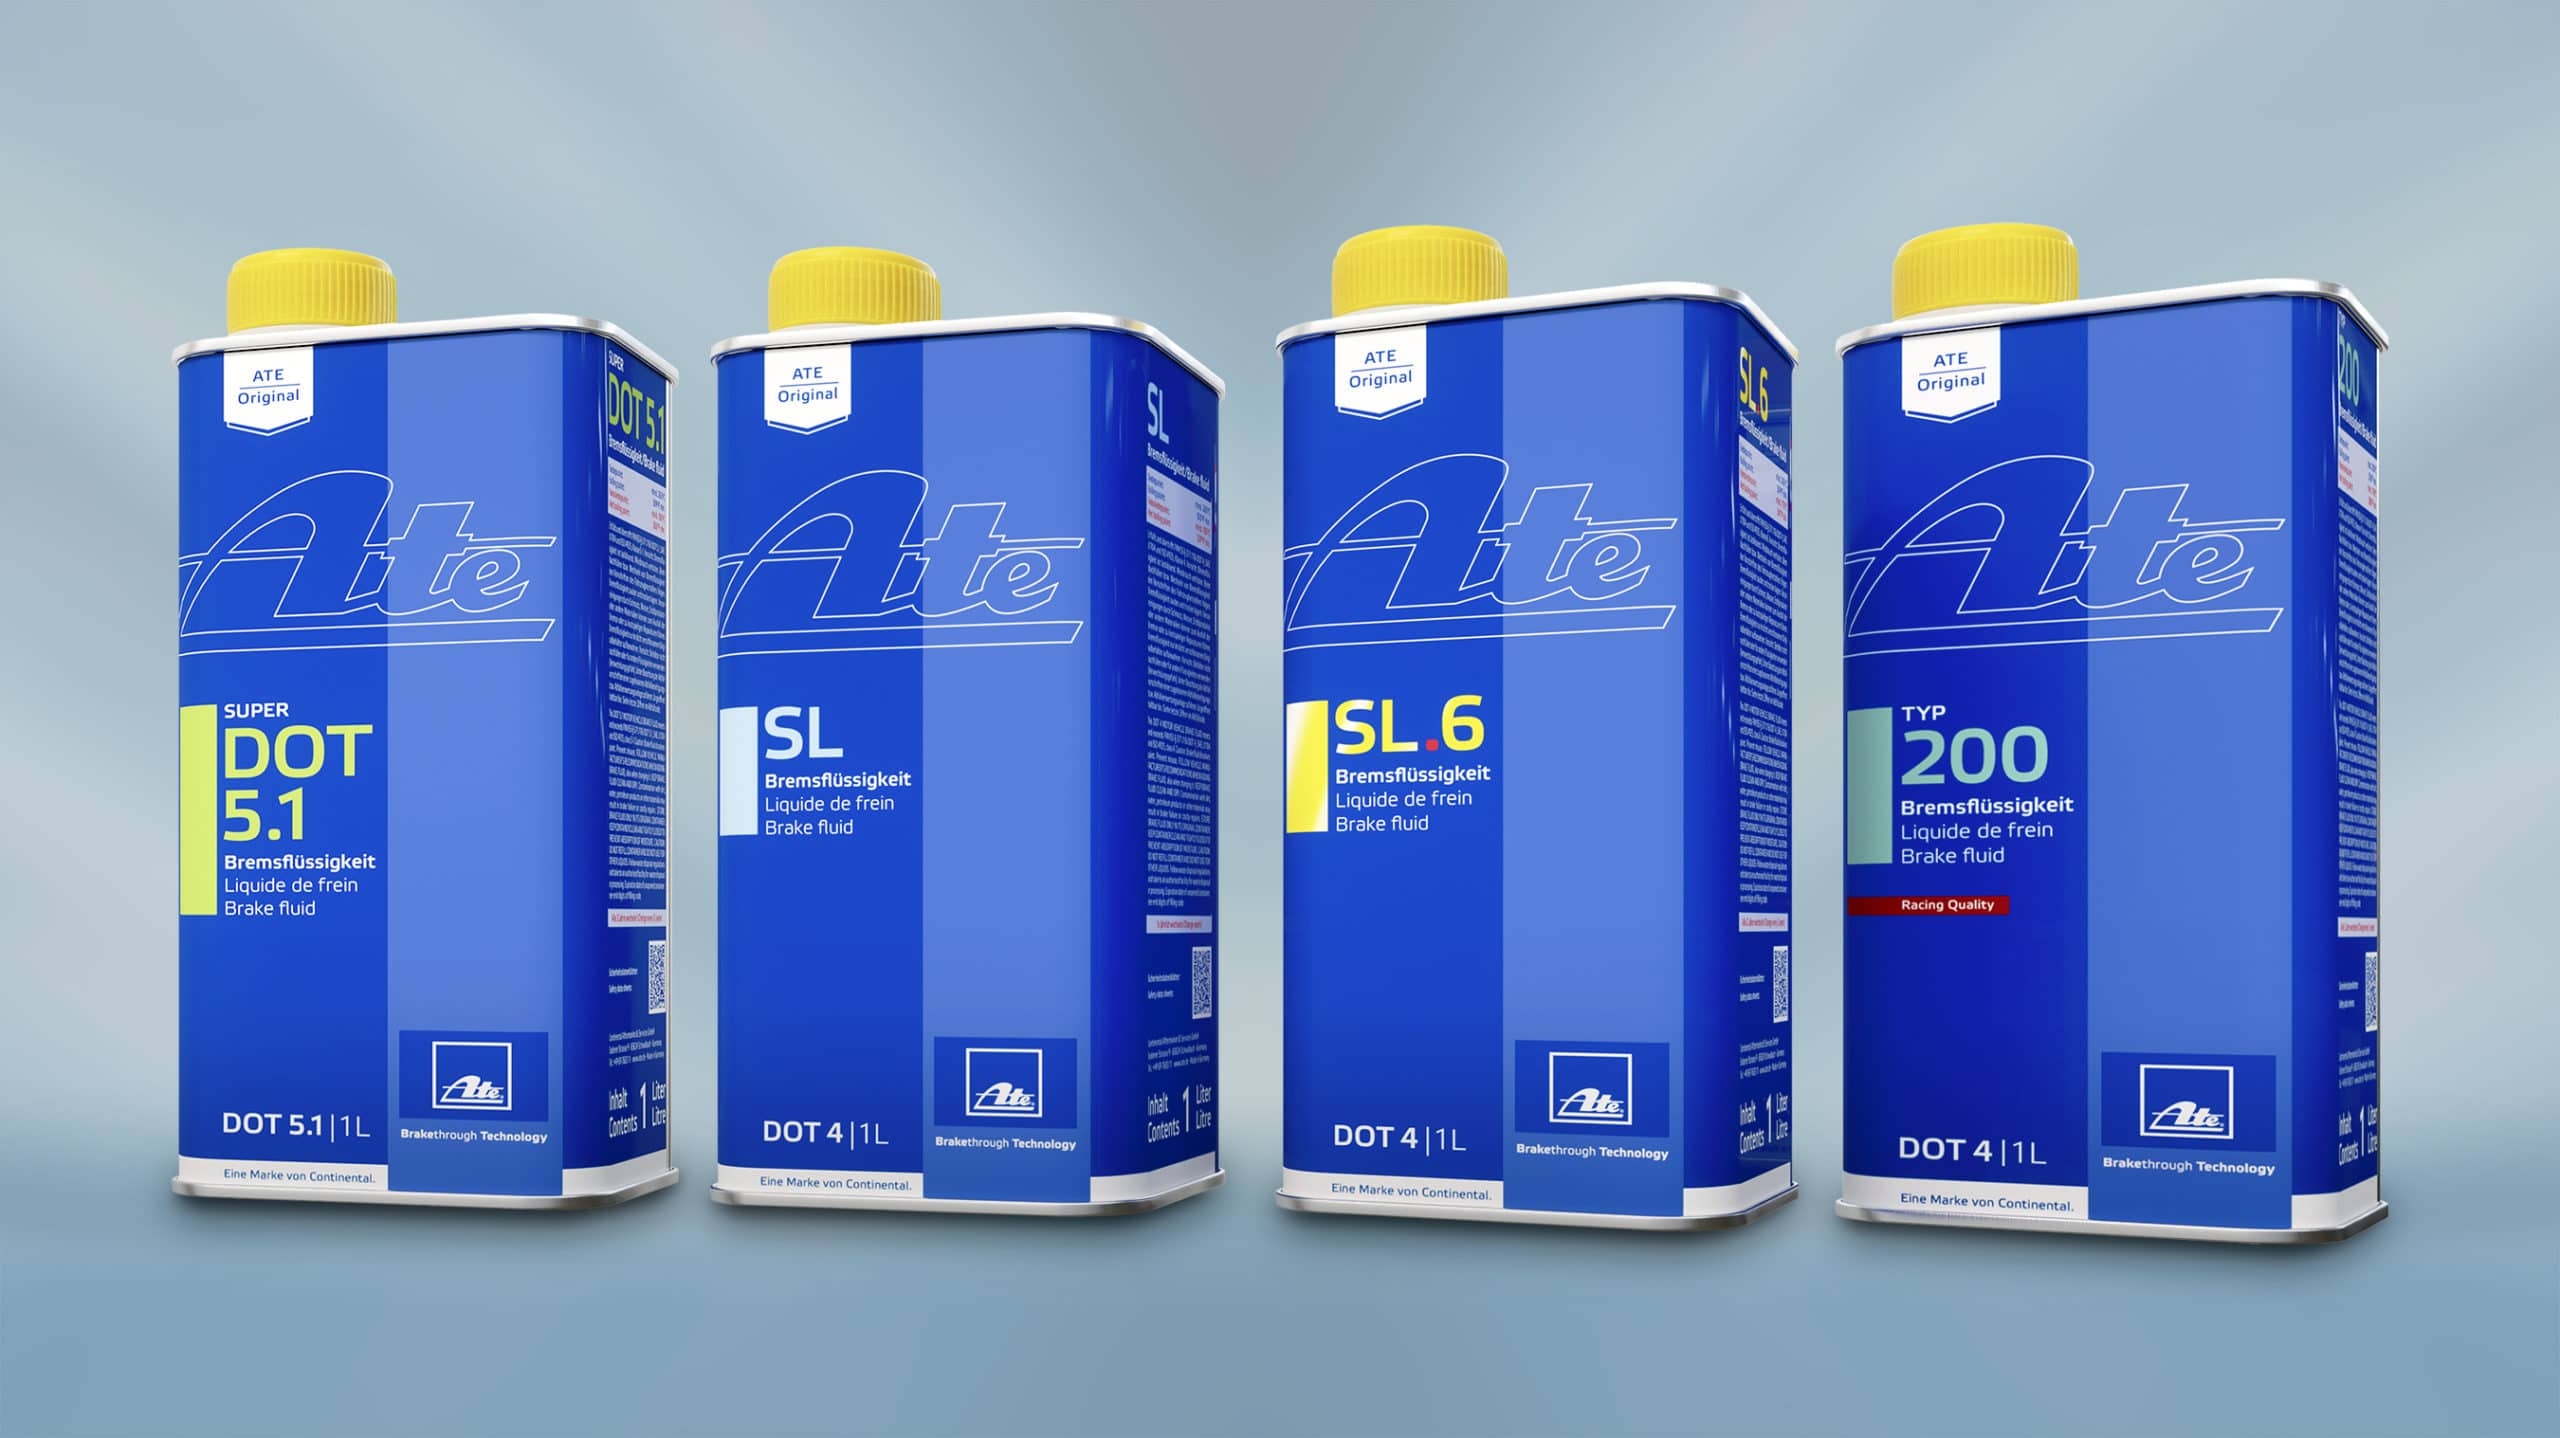 Continental's ATE brake fluid is engineered for top performance in all types of vehicles